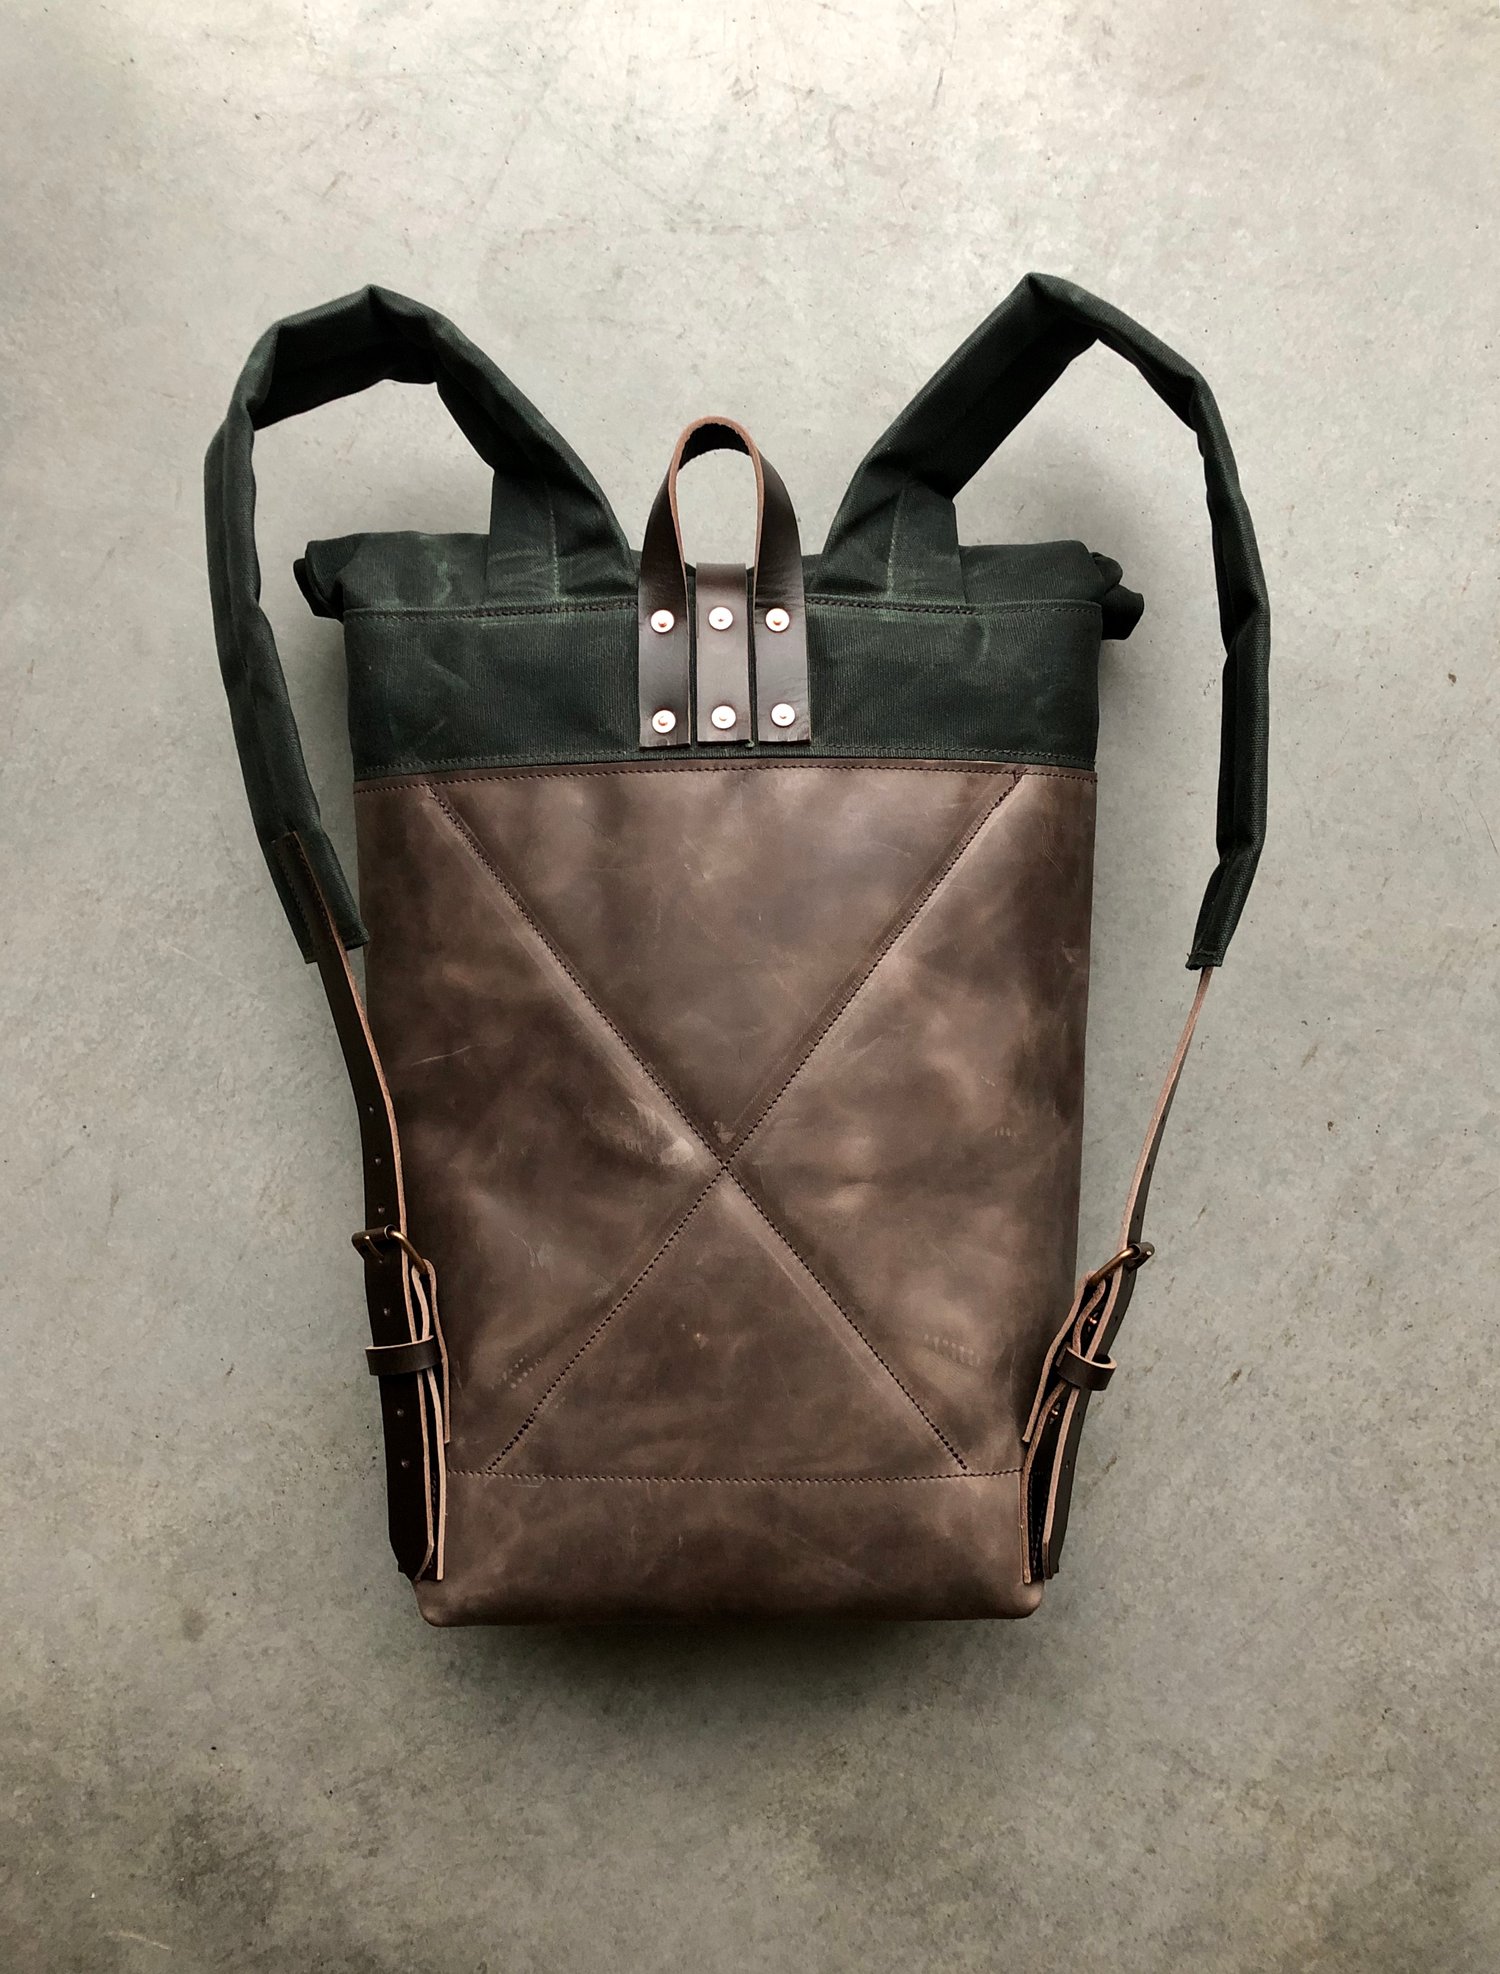 Image of Medium size, leather and waxed canvas backpack, with padded shoulder straps